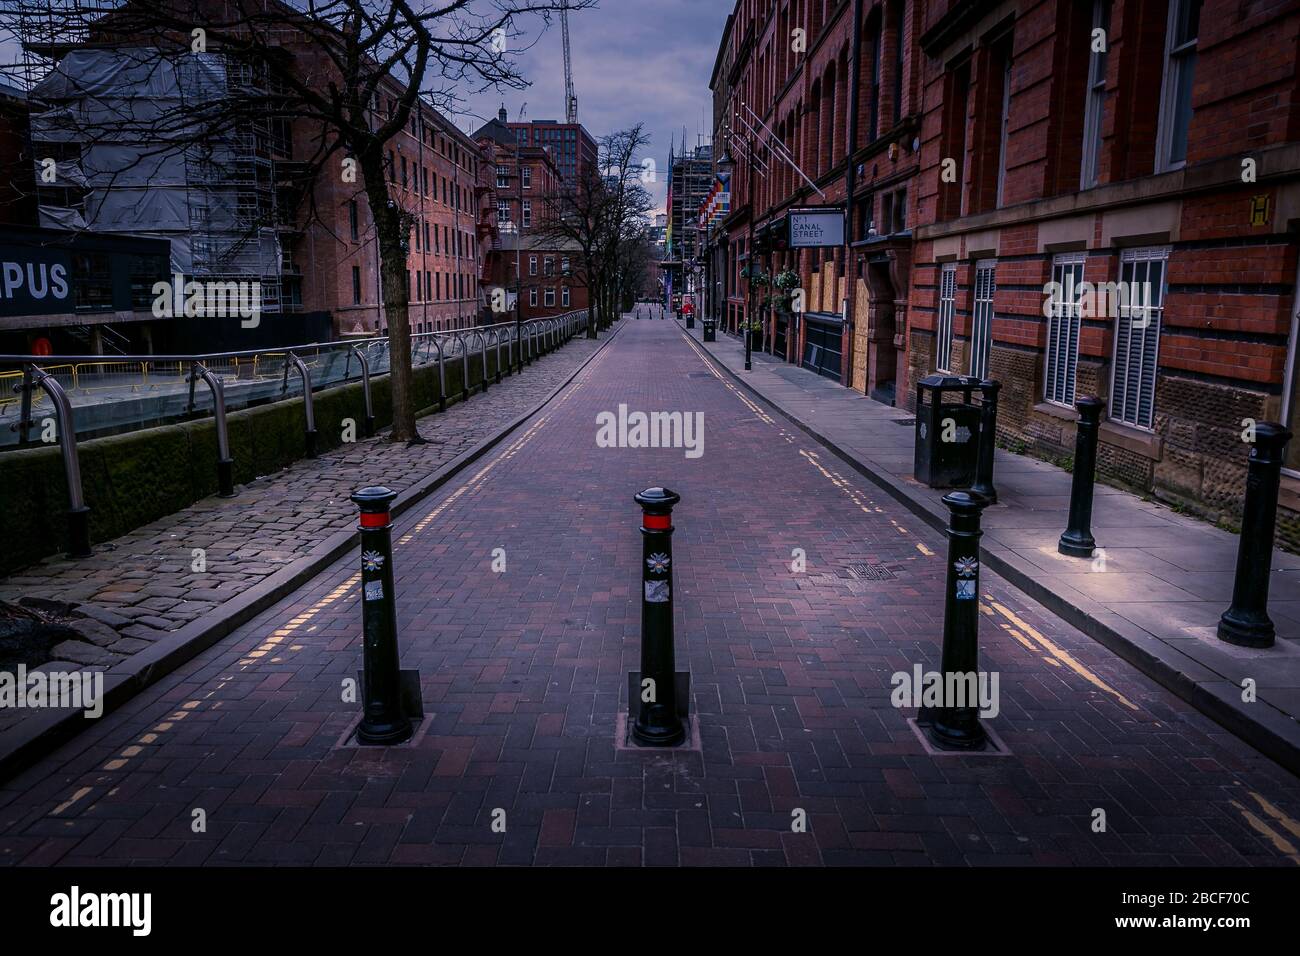 Canal Street, The Gay Village, Manchester, United Kingdom. Empty streets, closed business's during the coronavirus outbreak, April 2020. Stock Photo